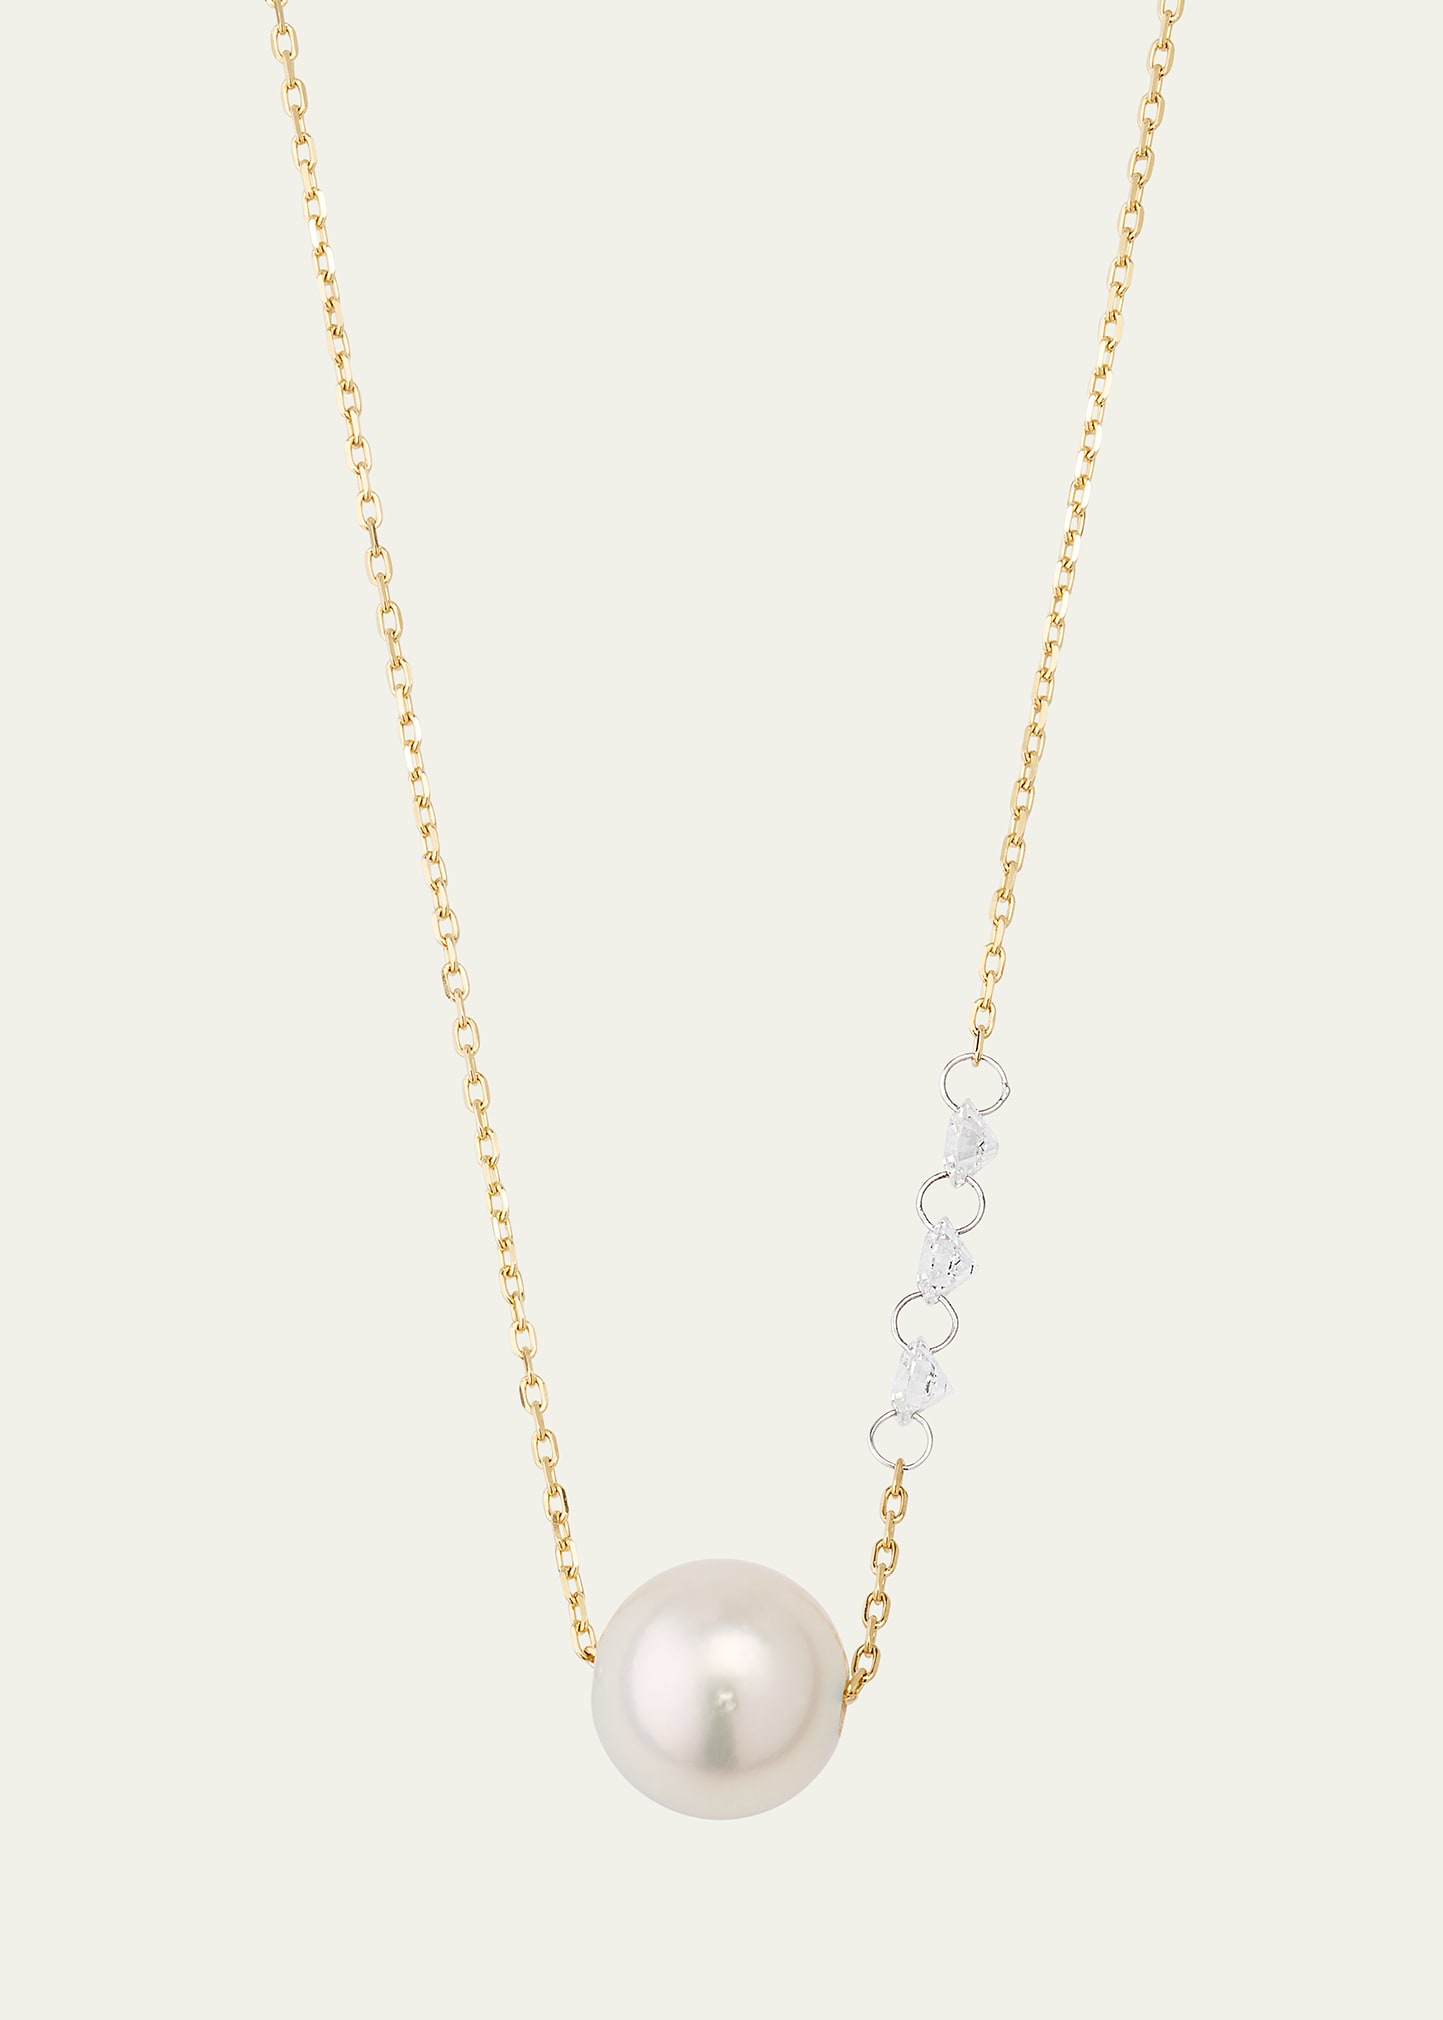 14K Yellow Gold Necklace with Diamonds and Sliding Akoya Pearl